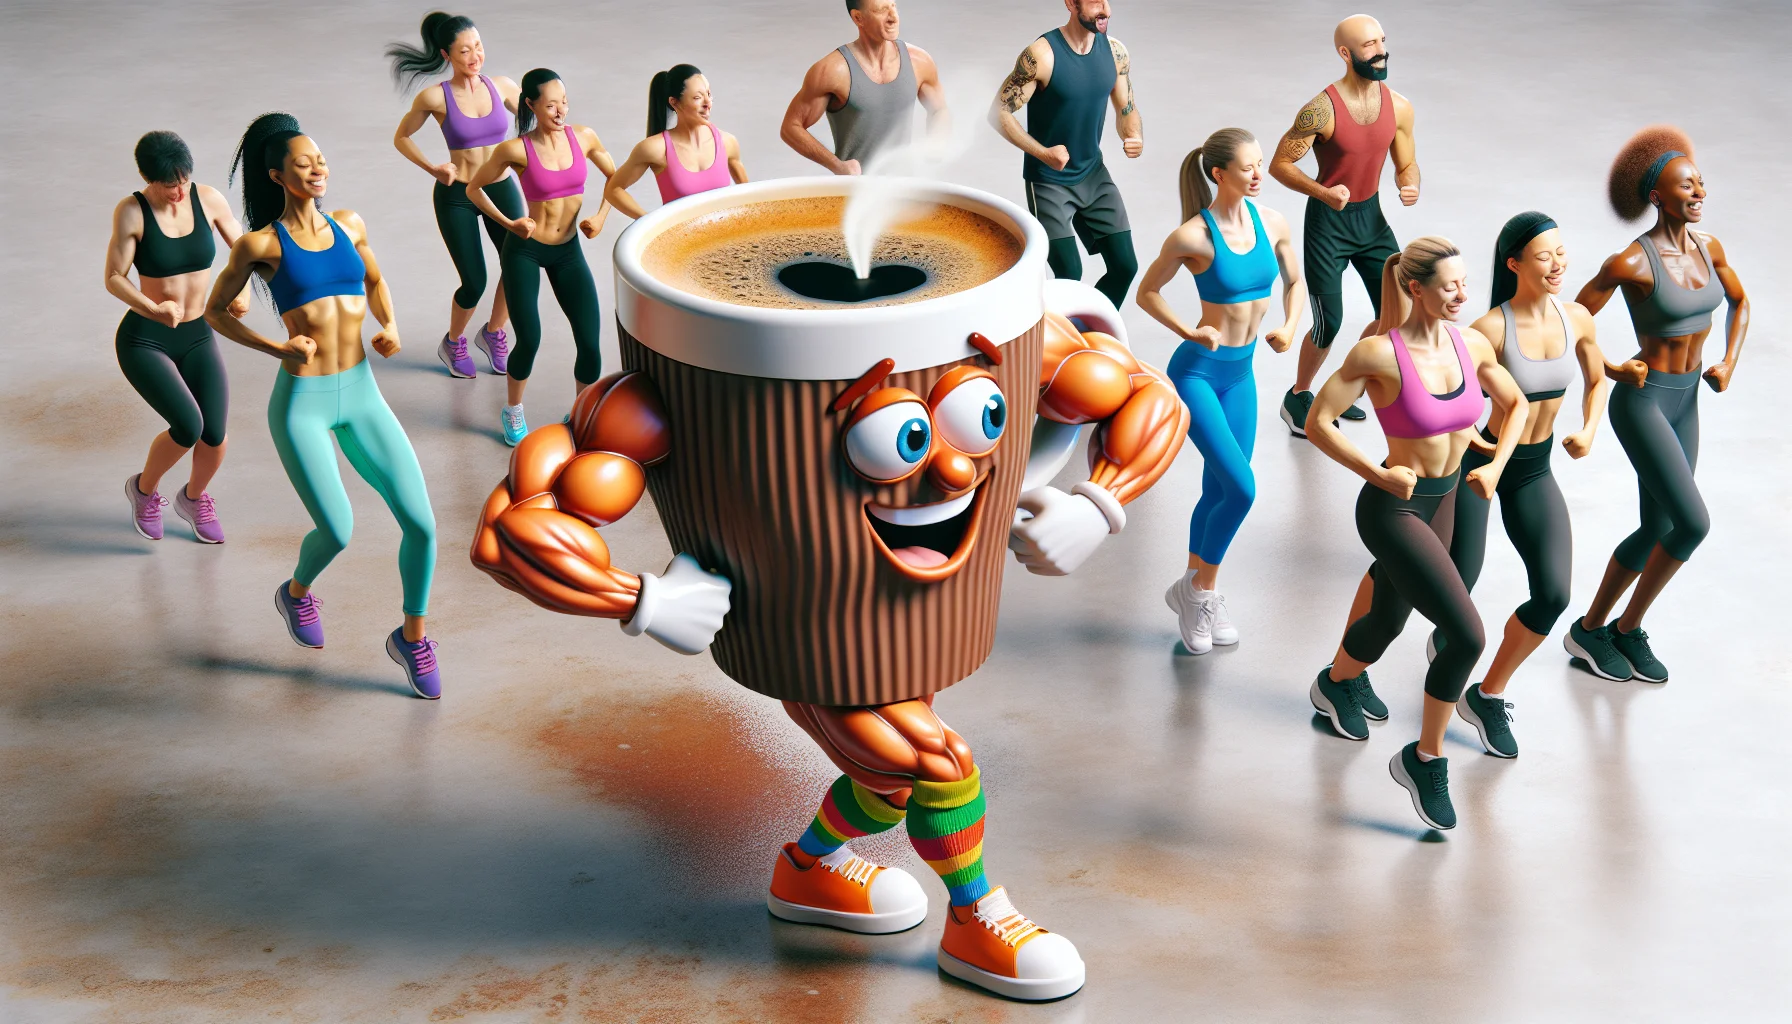 Imagine a scene where a physical manifestation of espresso, with muscular arms and legs, is participating in an aerobic dance class. This amusing, anthropomorphic cup of espresso, with steam wafting from its open top like sweat, is motivating a diverse group of humans around it. The humans vary in age, gender, and descent including Caucasian, Hispanic, Black, Middle-Eastern, and South Asian. They are all dancing rhythmically, wearing vibrant workout attire, and lively expressions etched on their faces suggest enjoyment and enthusiasm. This image captures the fun element of healthy living while promoting the love for espresso.